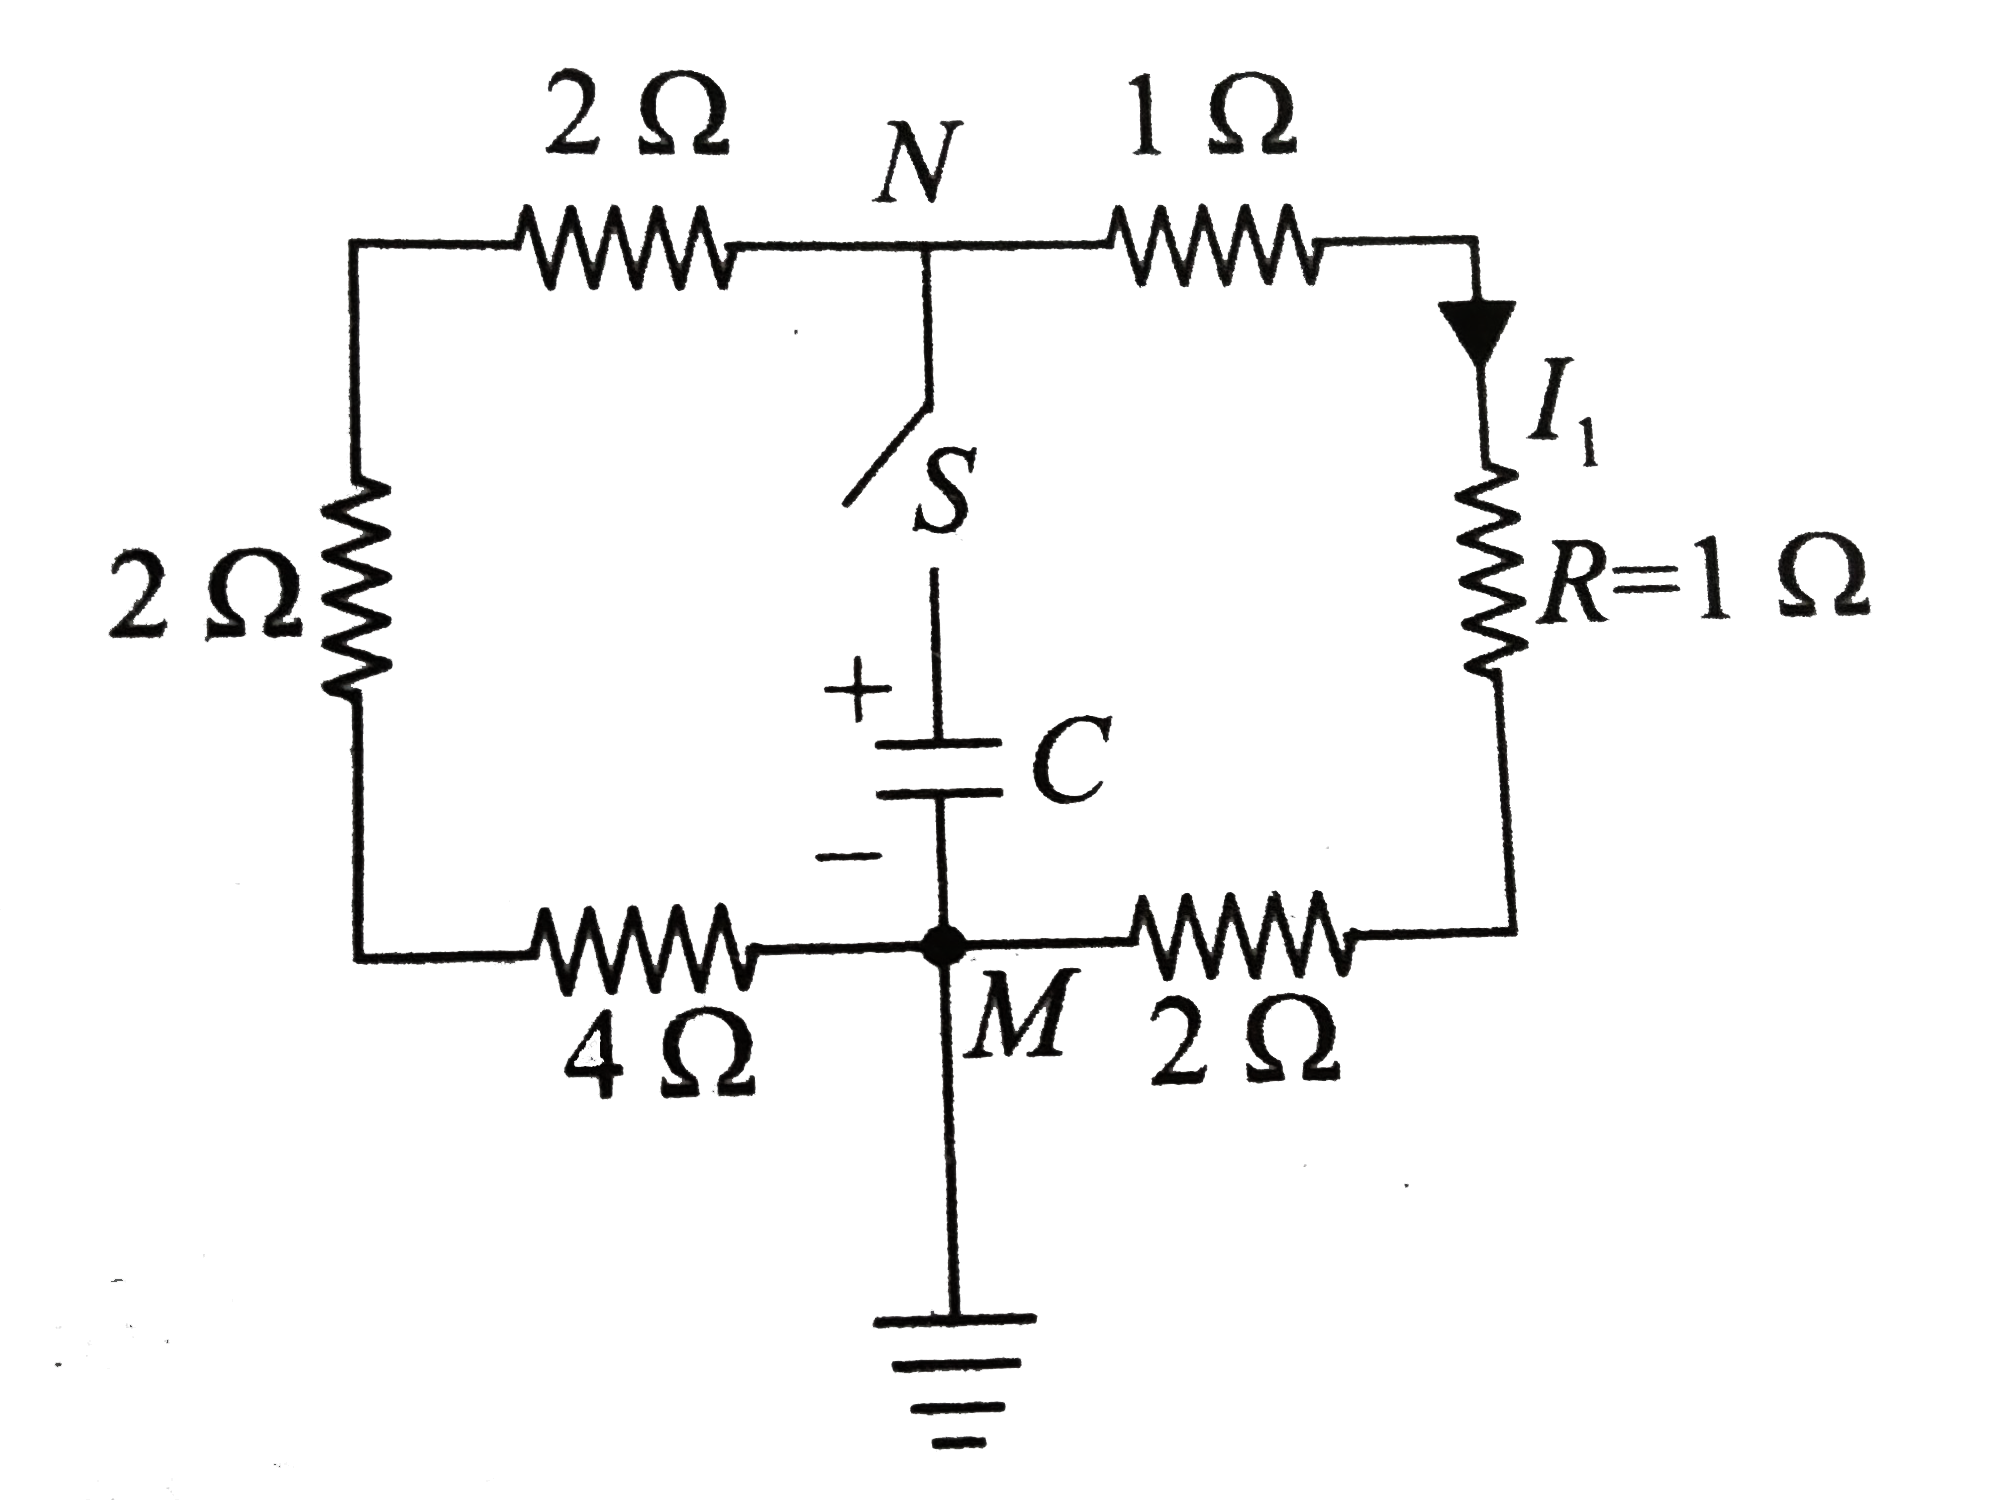 A capacitor of capacity 6muF and initial charge 160muC is connected with key S and resistance as shown in figure. Point M is earthed. If key is closed at t= 0, then the current (I(1) through resistance R (=1